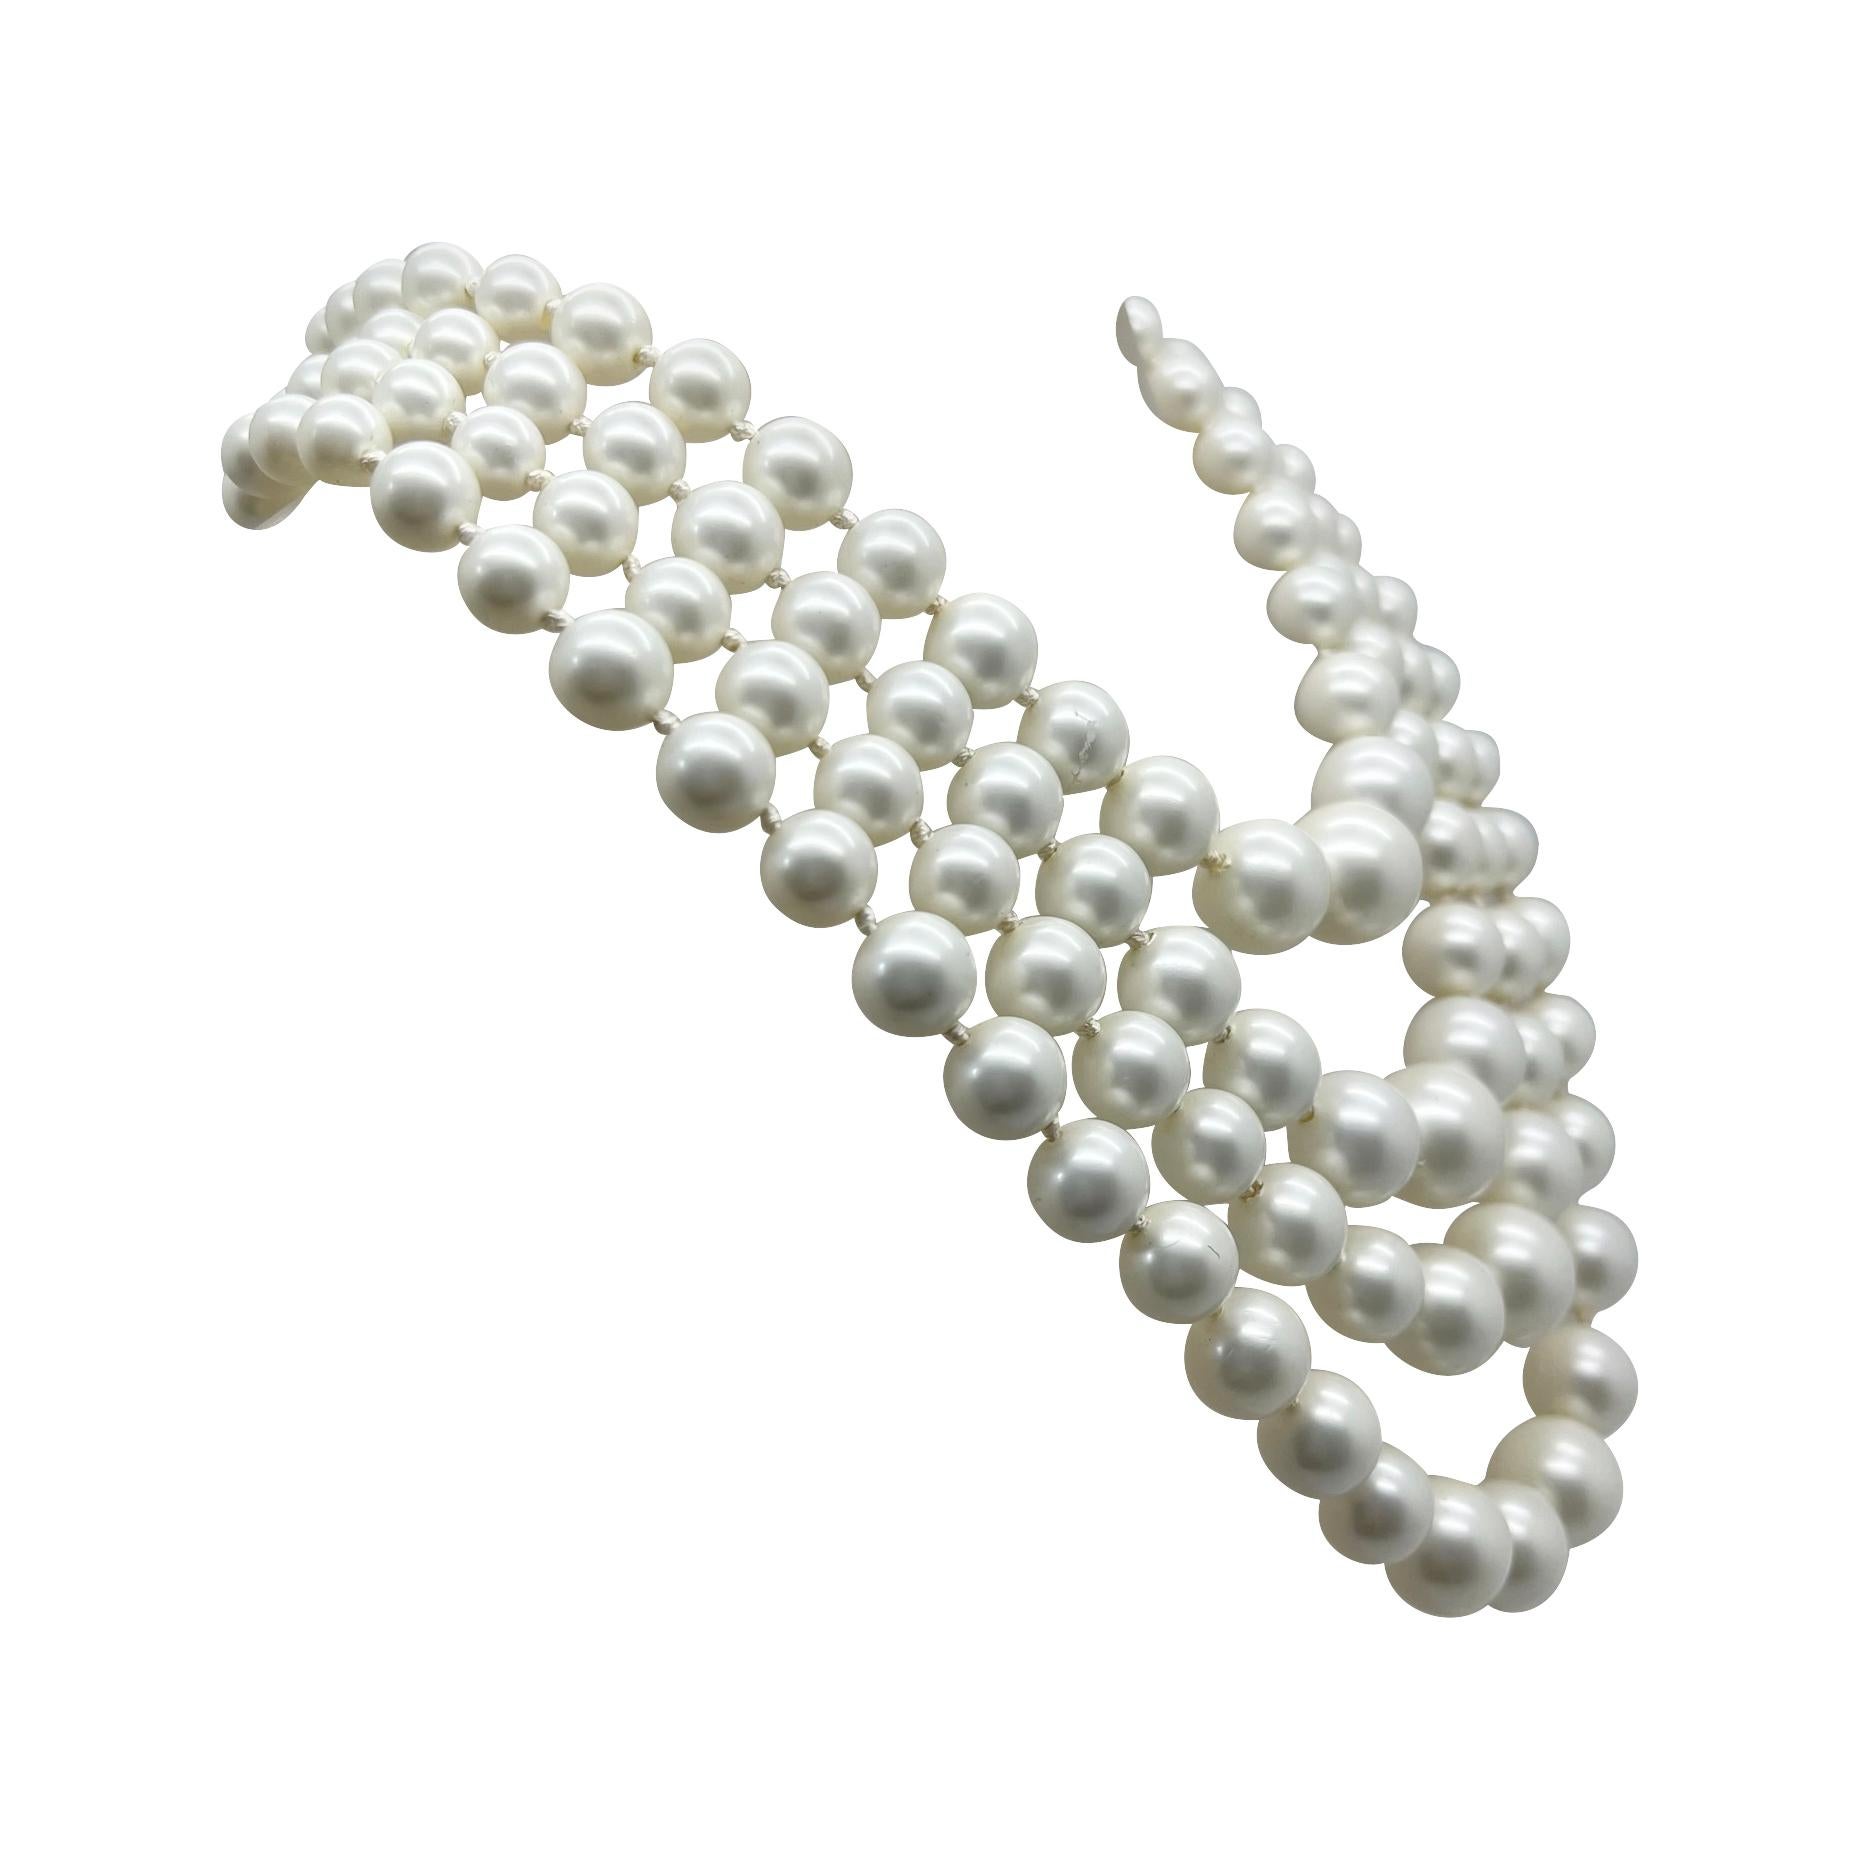 A wonderfully chic vintage Richelieu pearl collar. Four fabulous row of lustrous pearls oozing timeless style with impact.
Richelieu. Founded in 1911 in New York, Richelieu became a huge costume jewellery name during the 1940s and ‘50s as makers of